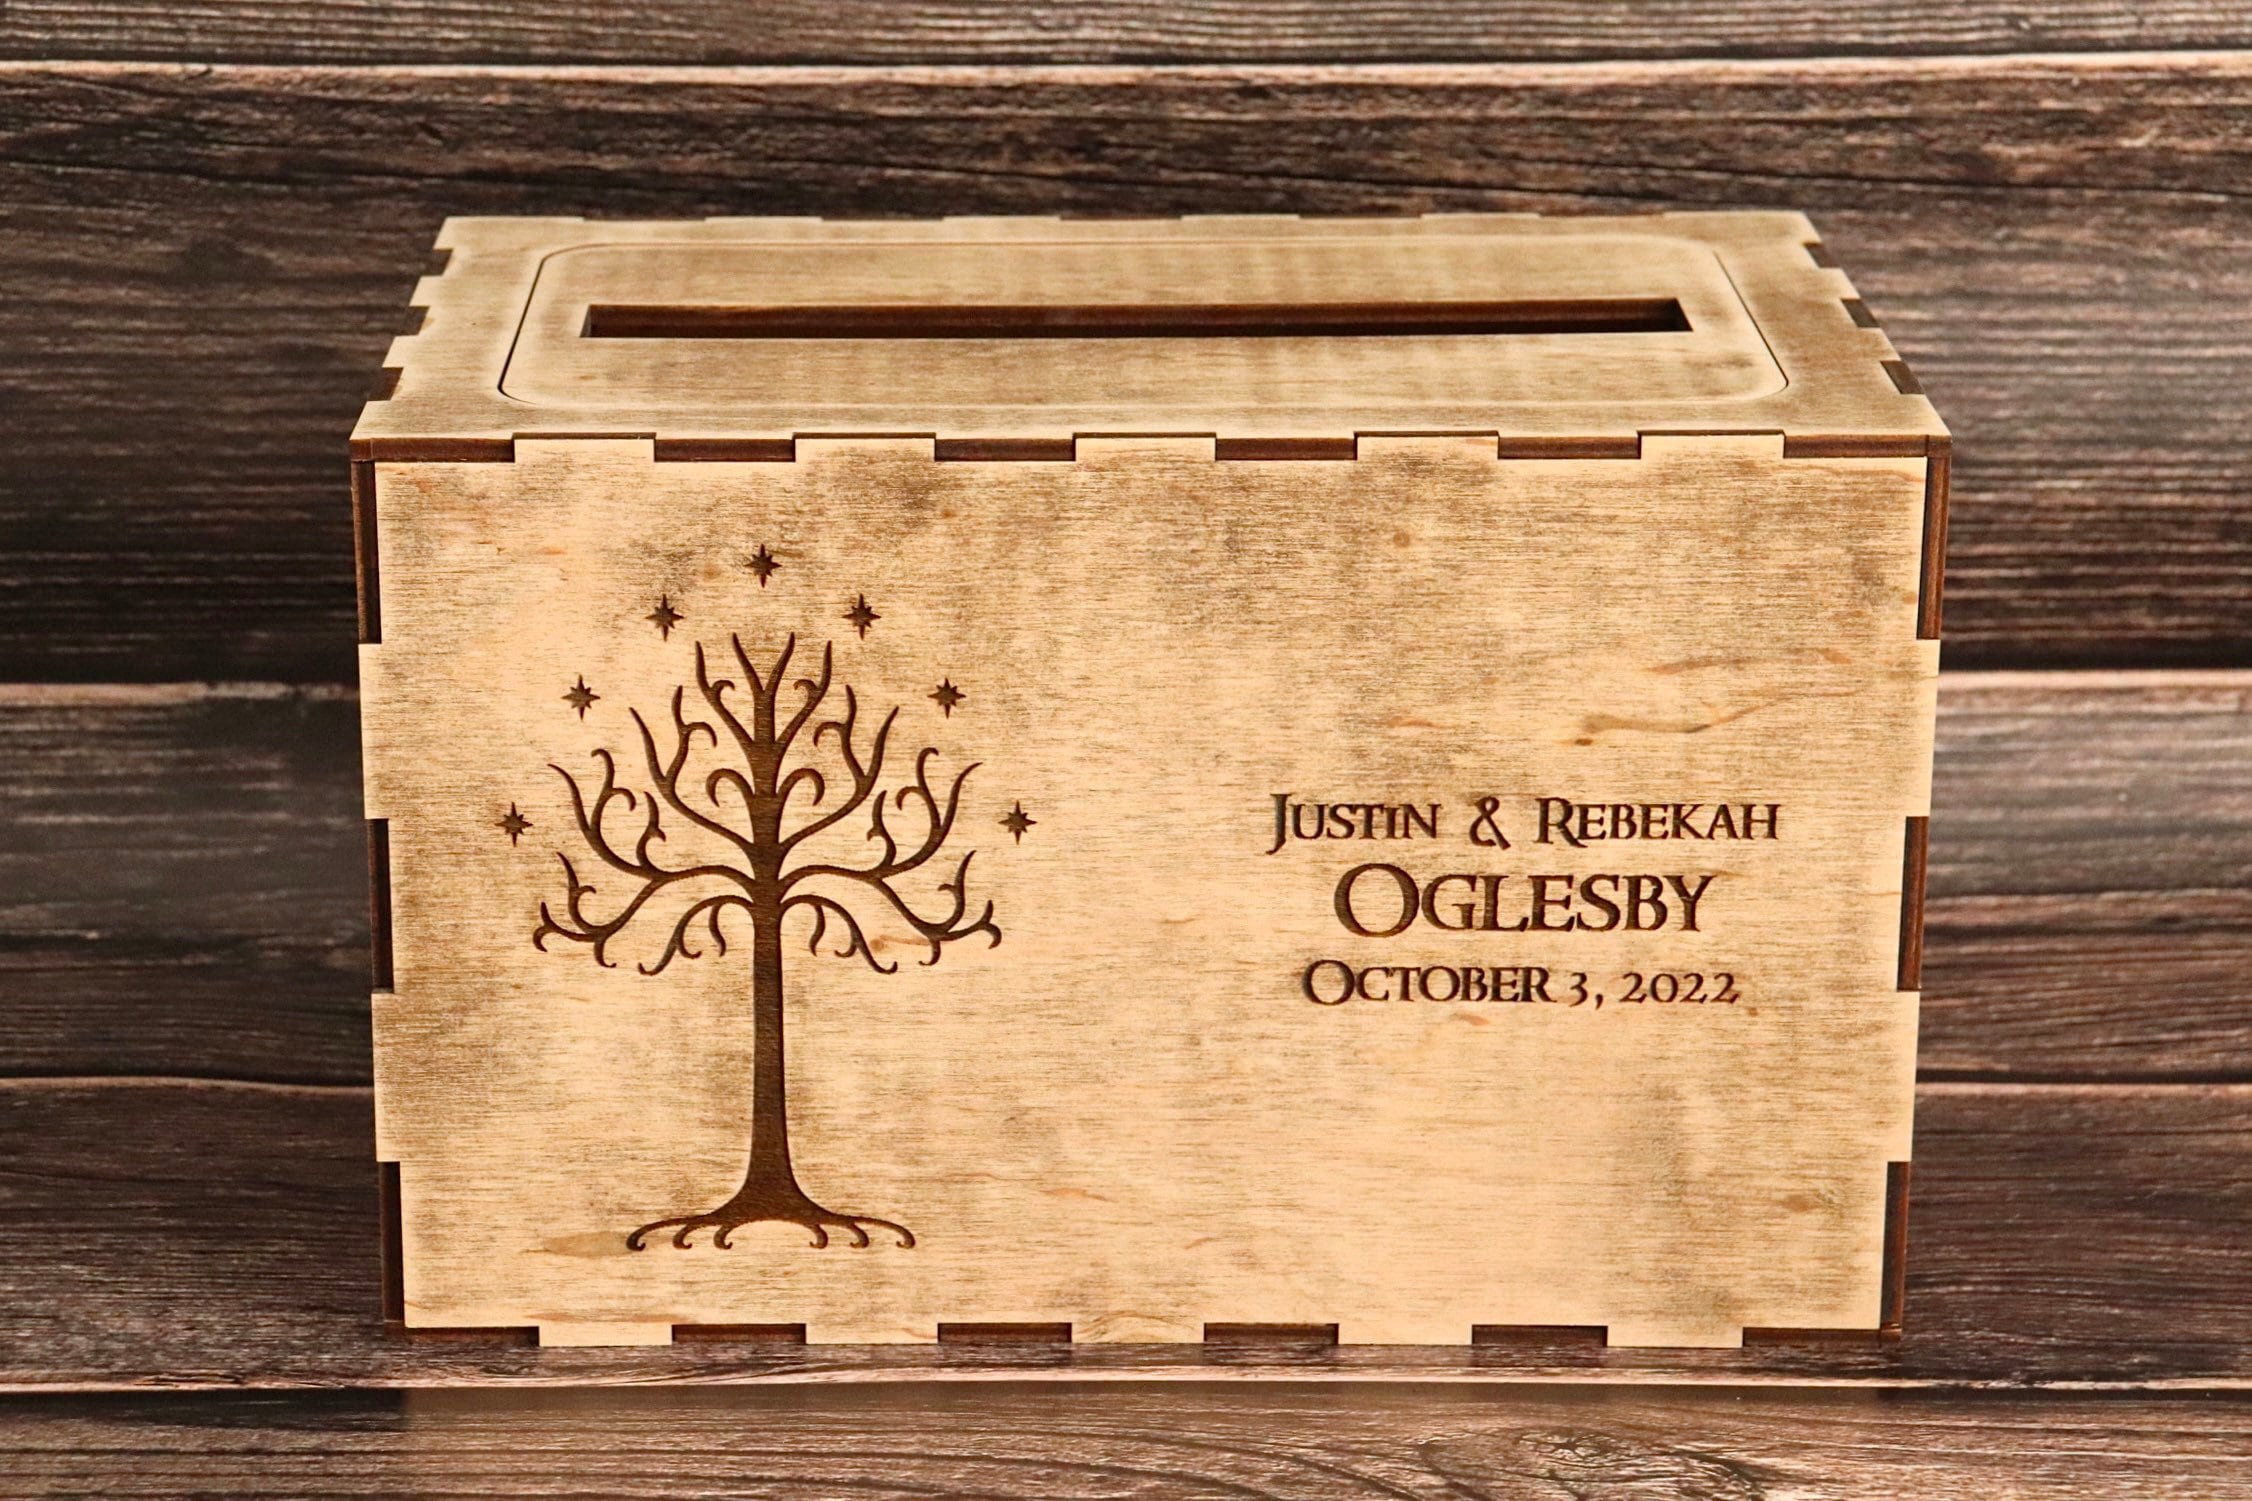 Gondor Tree Ring Box, the Lord of the Rings, Tolkien Inspired Wedding Box,  Proposal Ring Box, Engagement Box 